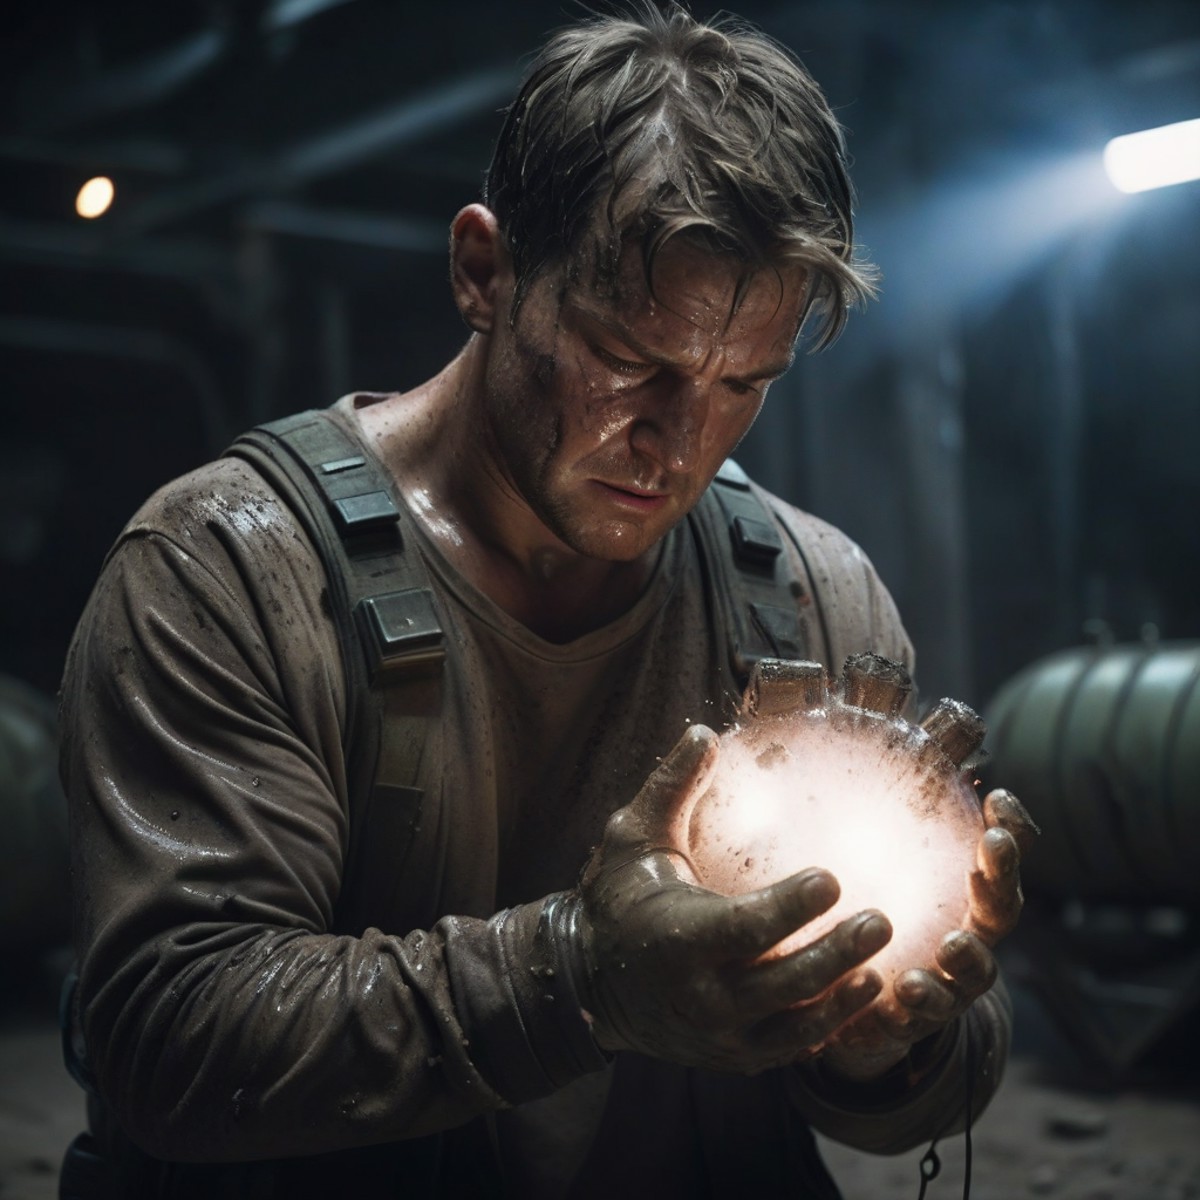 cinematic shot of a man with a dirty face and sweat on his face looking down at his hands holding a bomb, holding futurist...